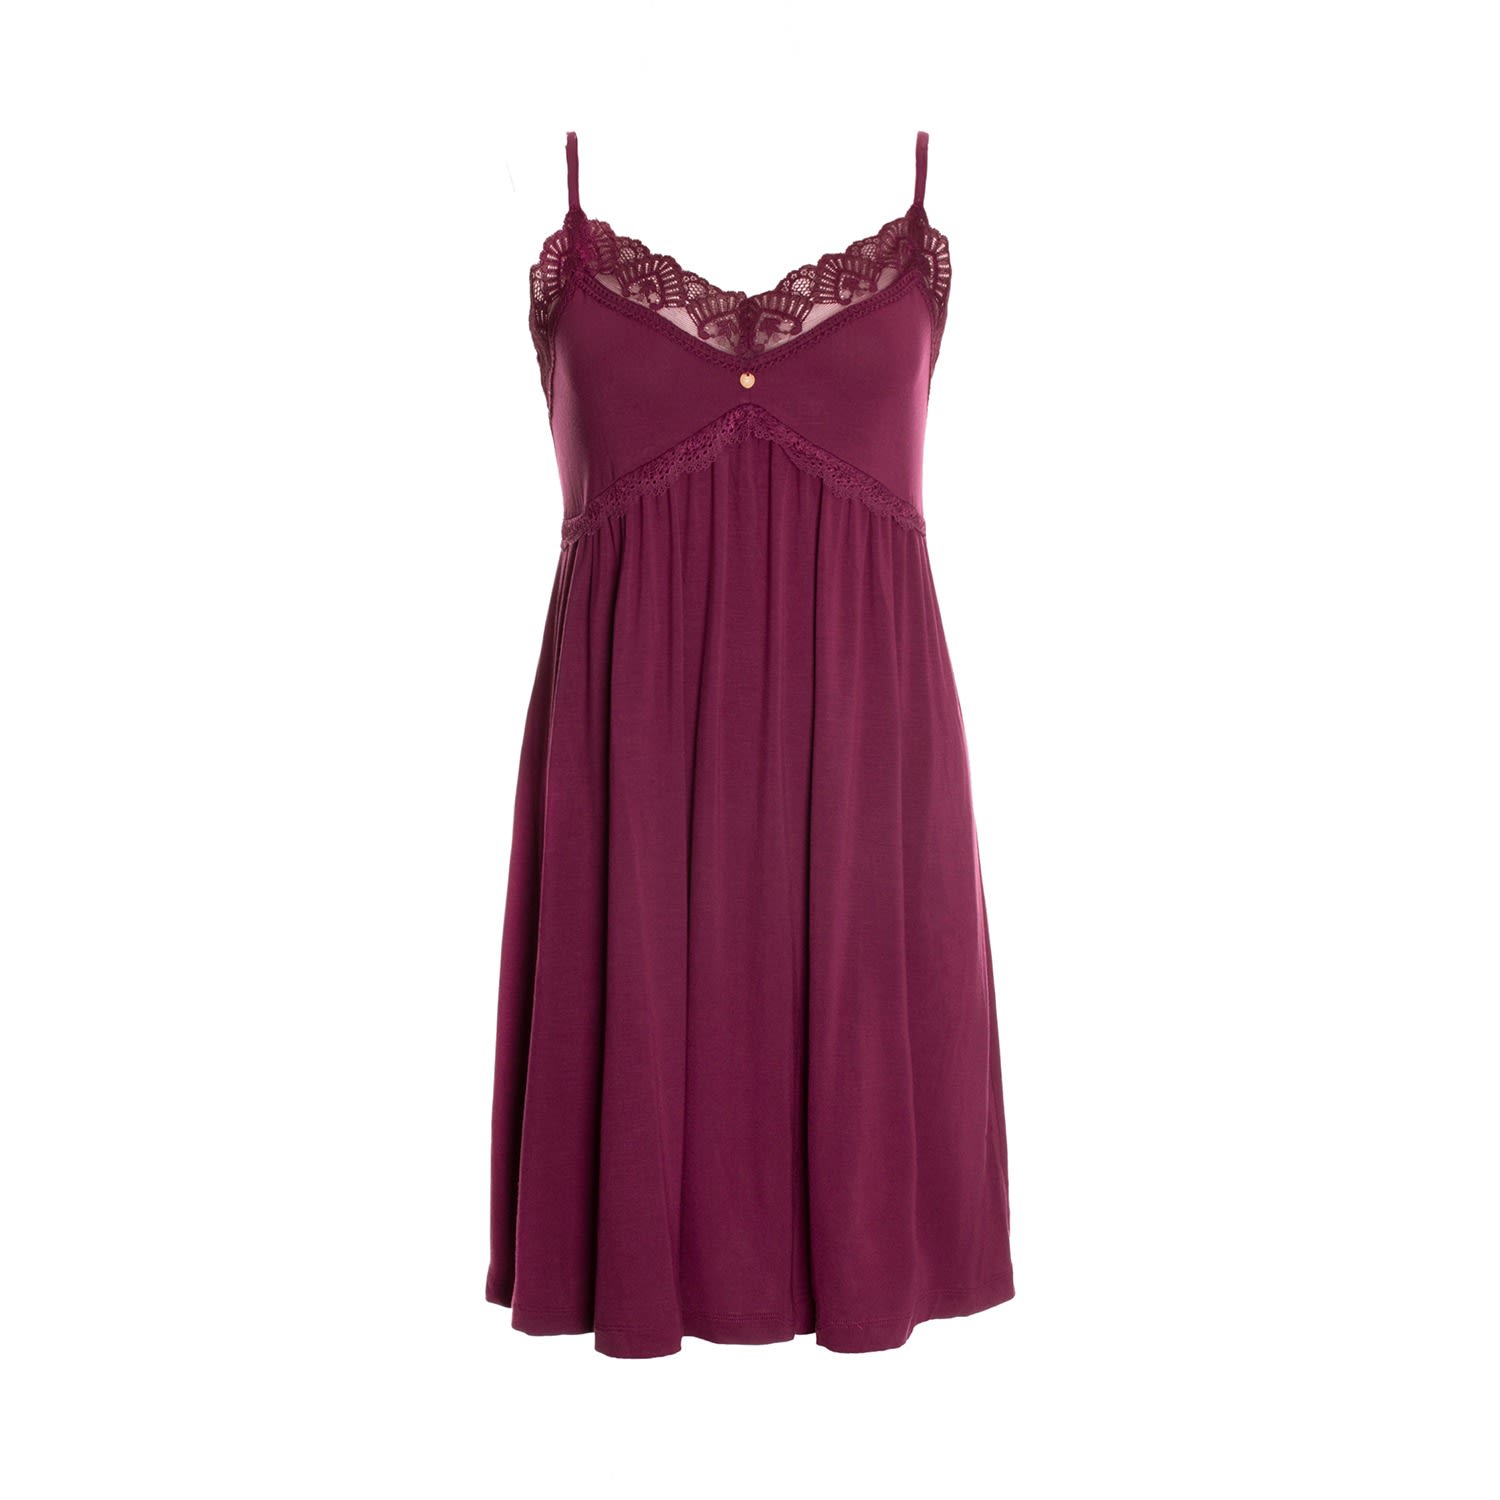 Pretty You Women's Red Bamboo Lace Chemise Nightdress In Bordeaux In Burgundy